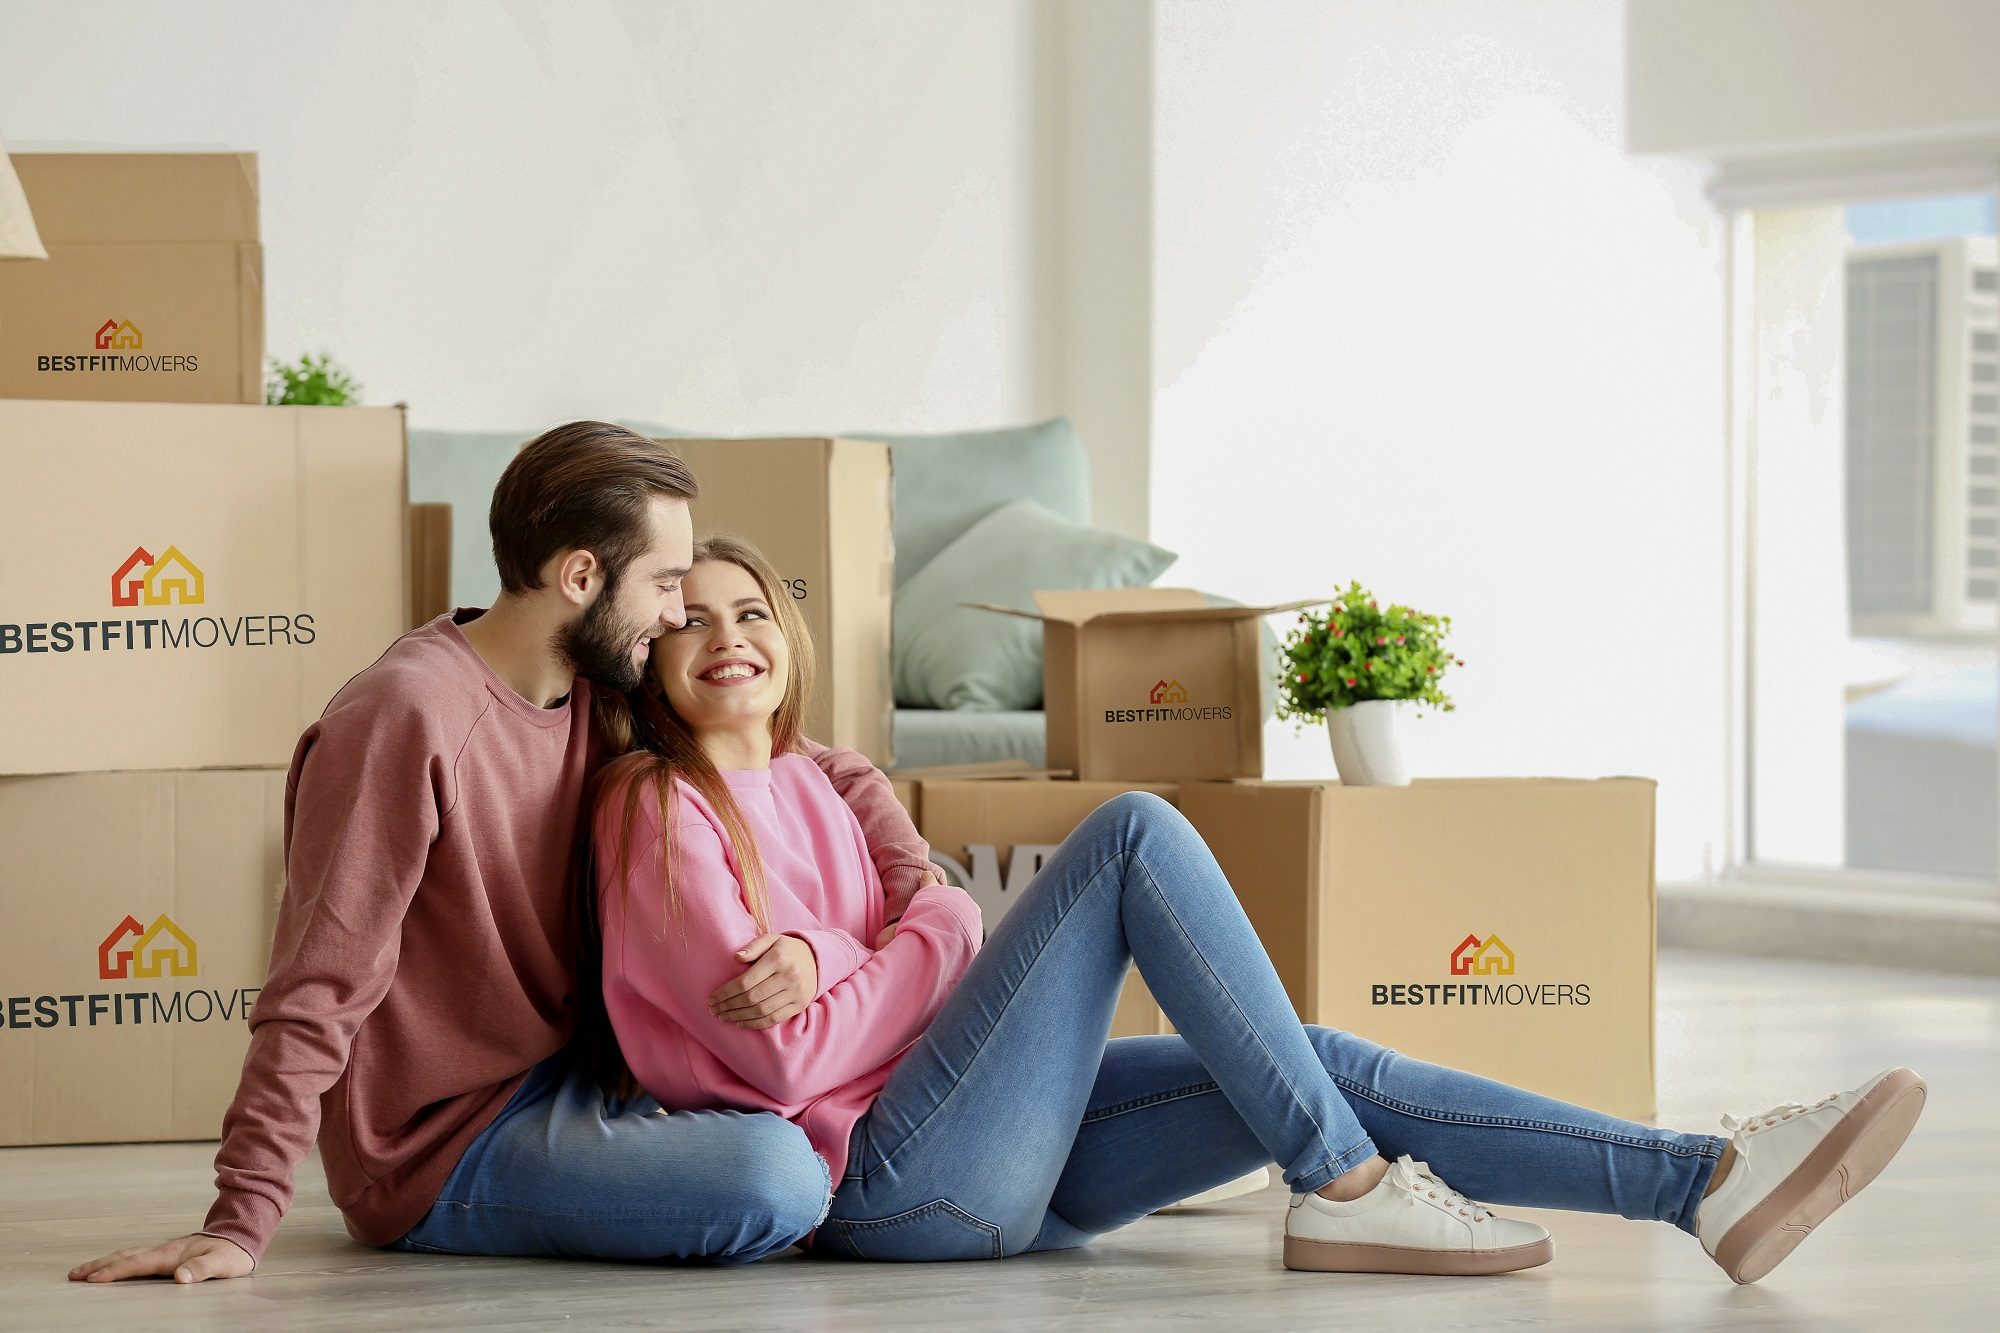 couple leaning against moving boxes while smiling